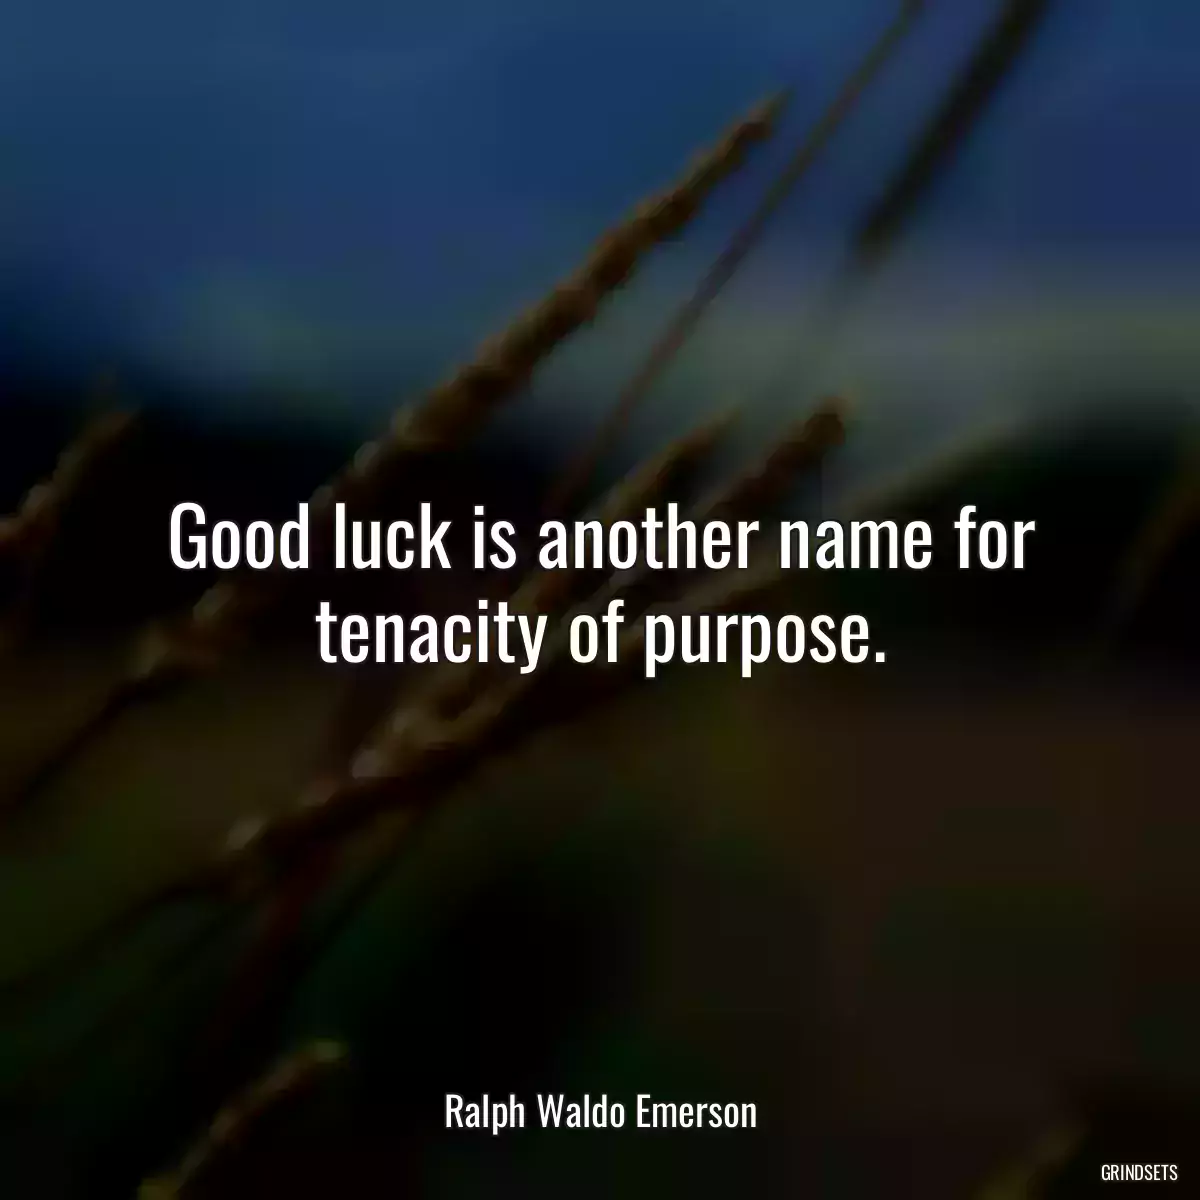 Good luck is another name for tenacity of purpose.